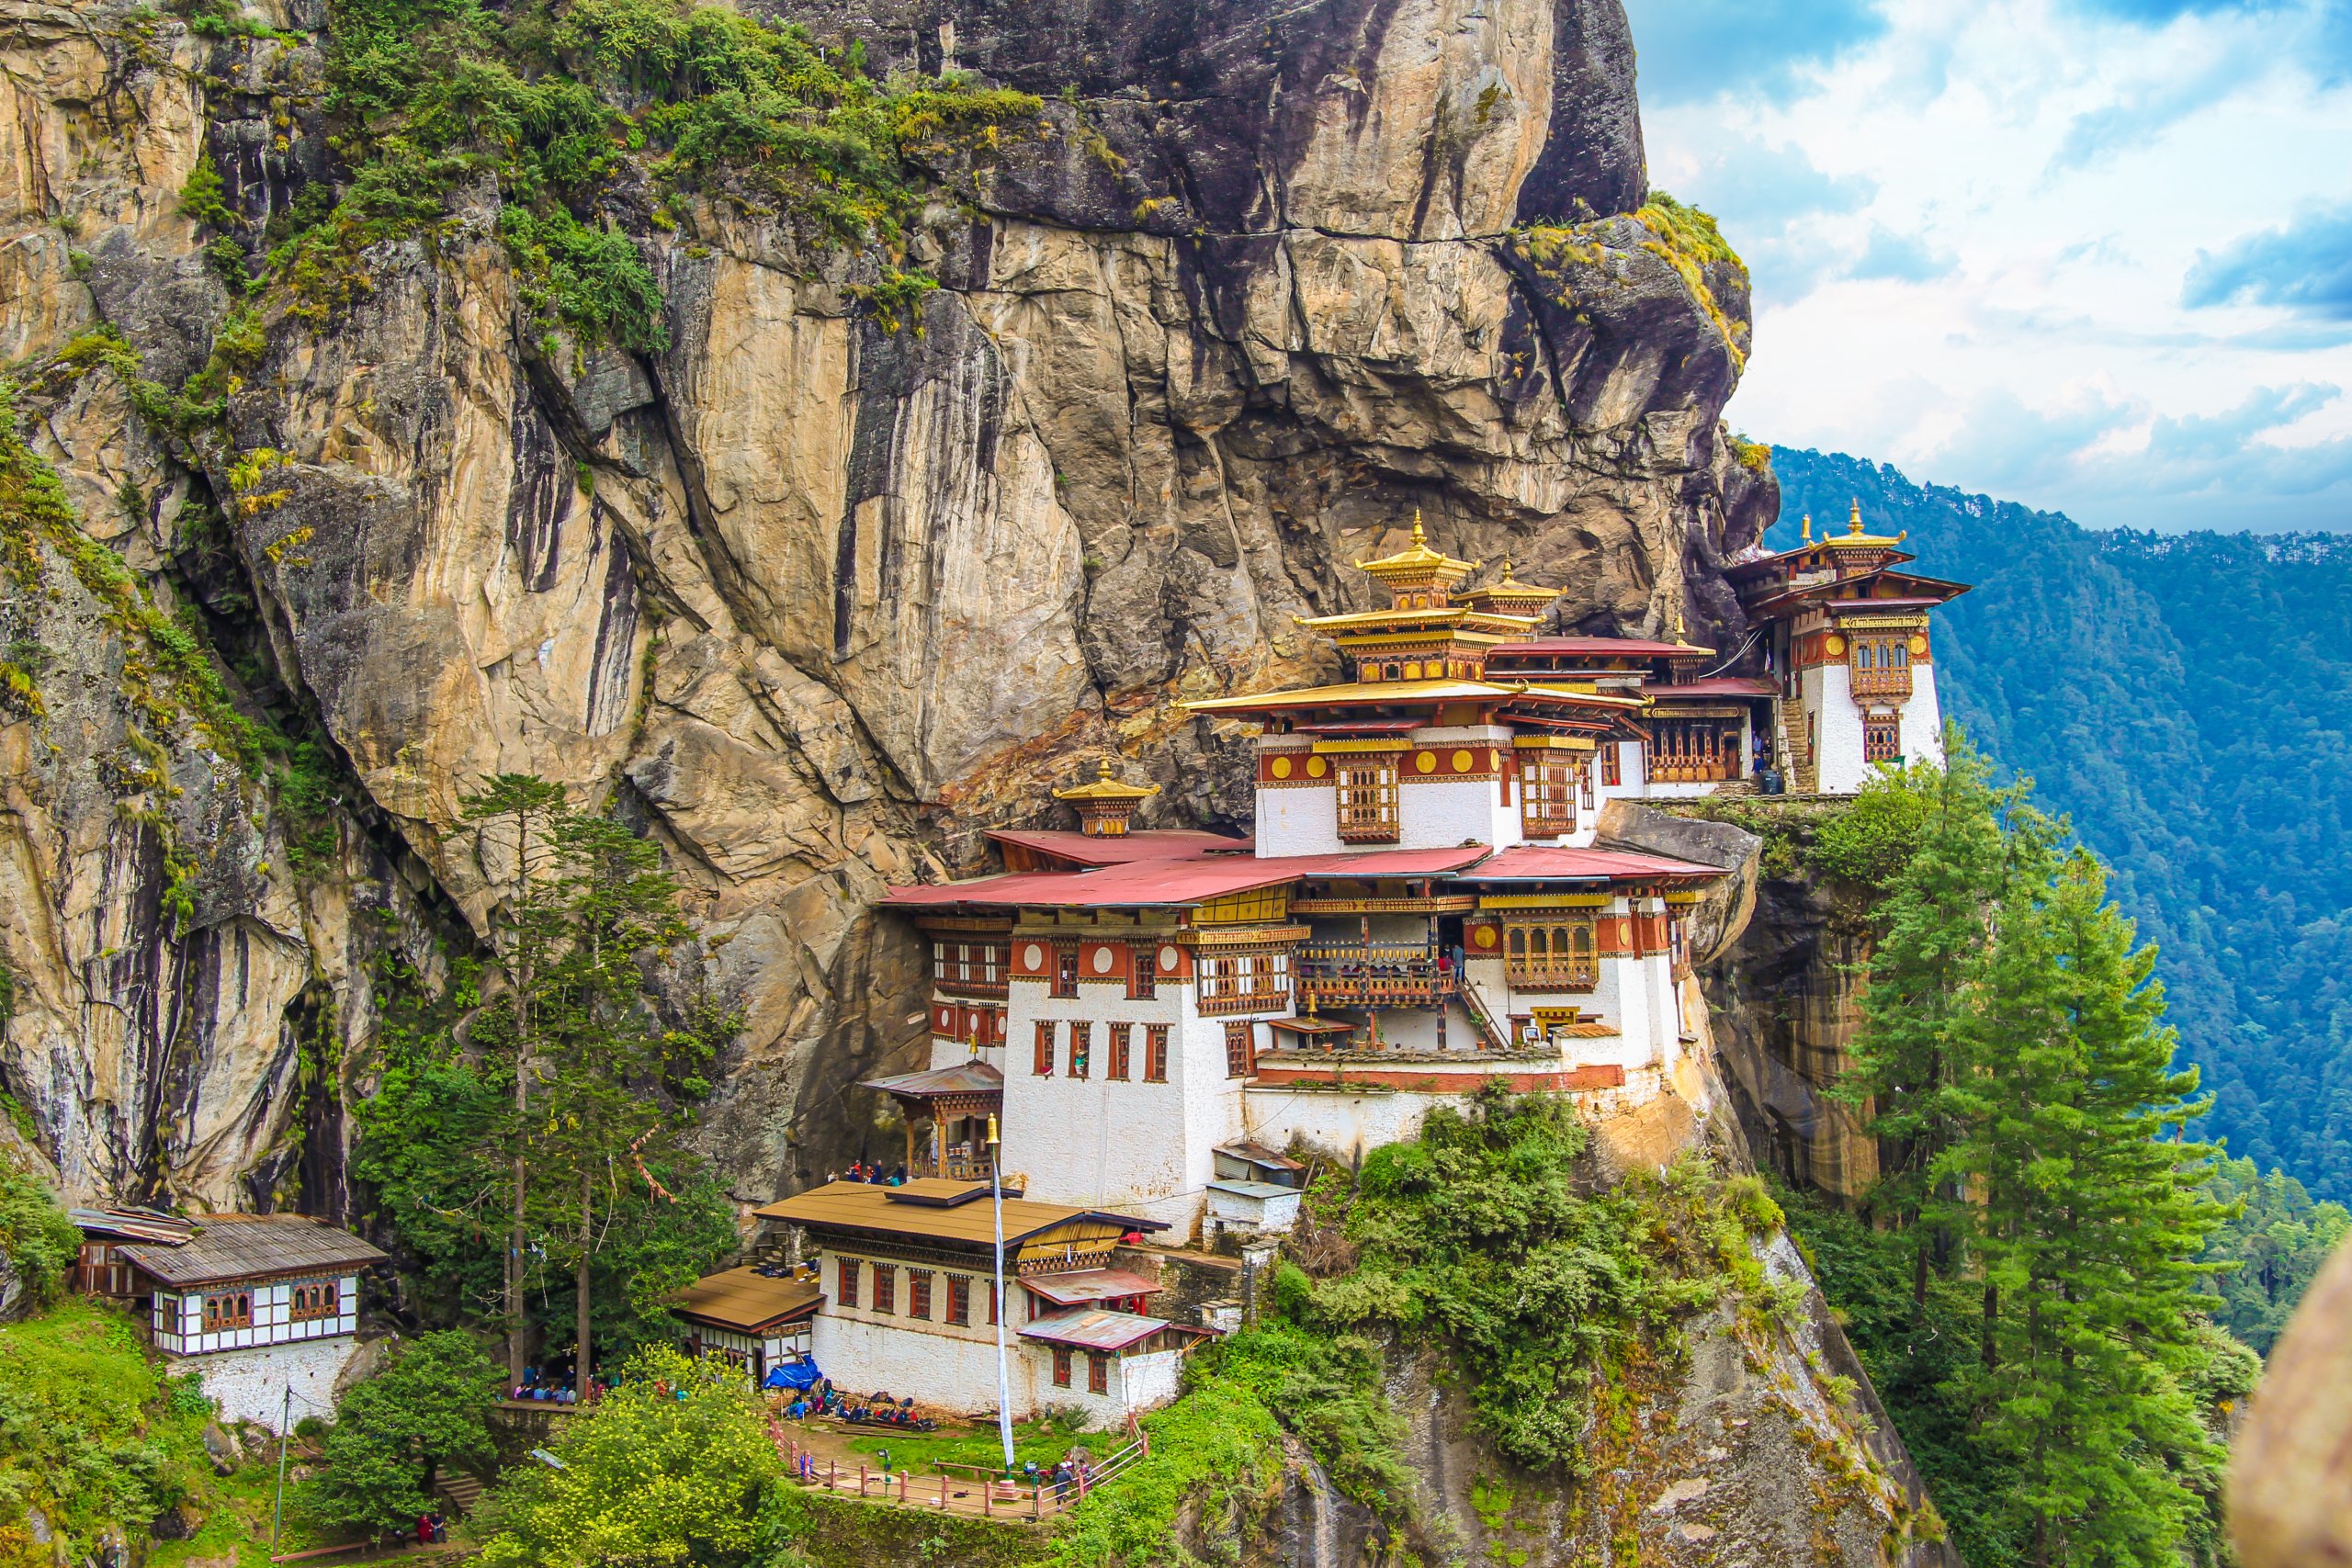 view of the Tiger’s Nest monastery also known as the Paro Taktsang and the surrounding area in Bhutan.